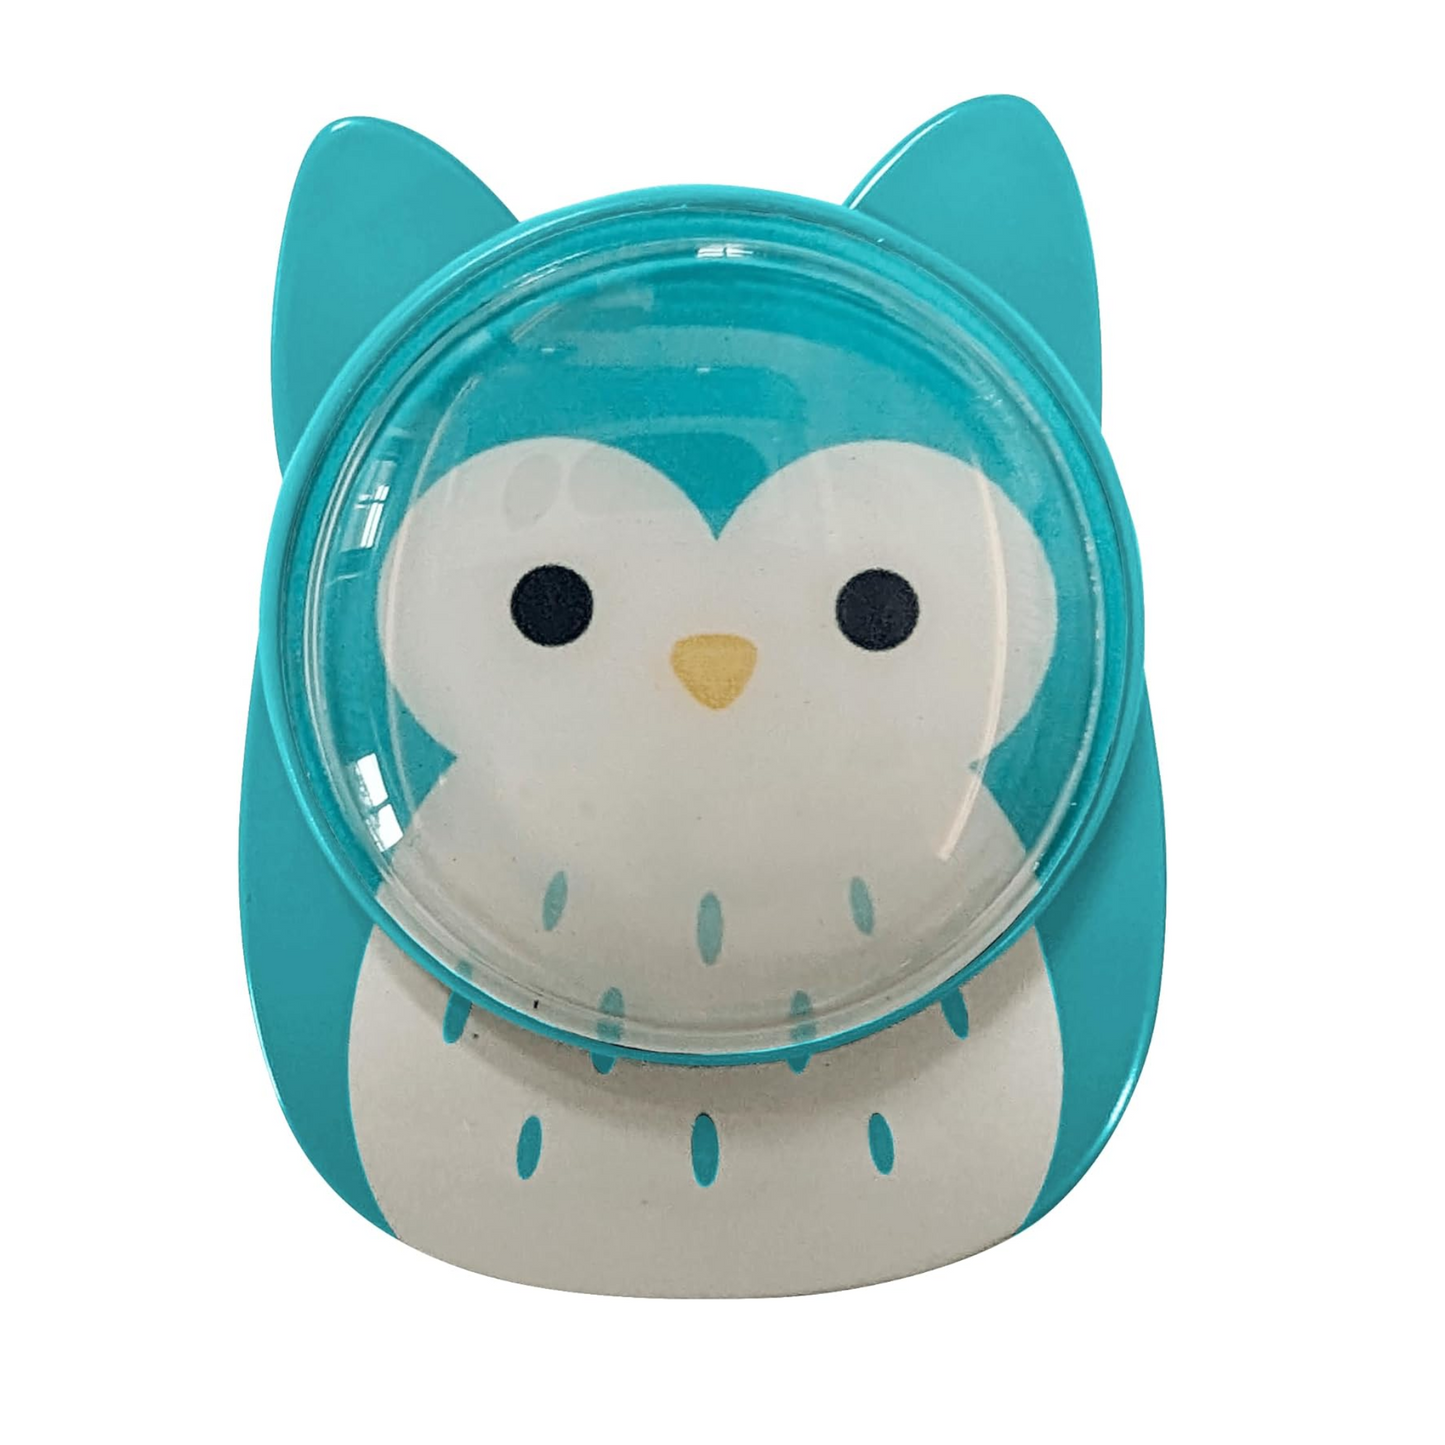 Squishmallows phone grip with stand - Winston